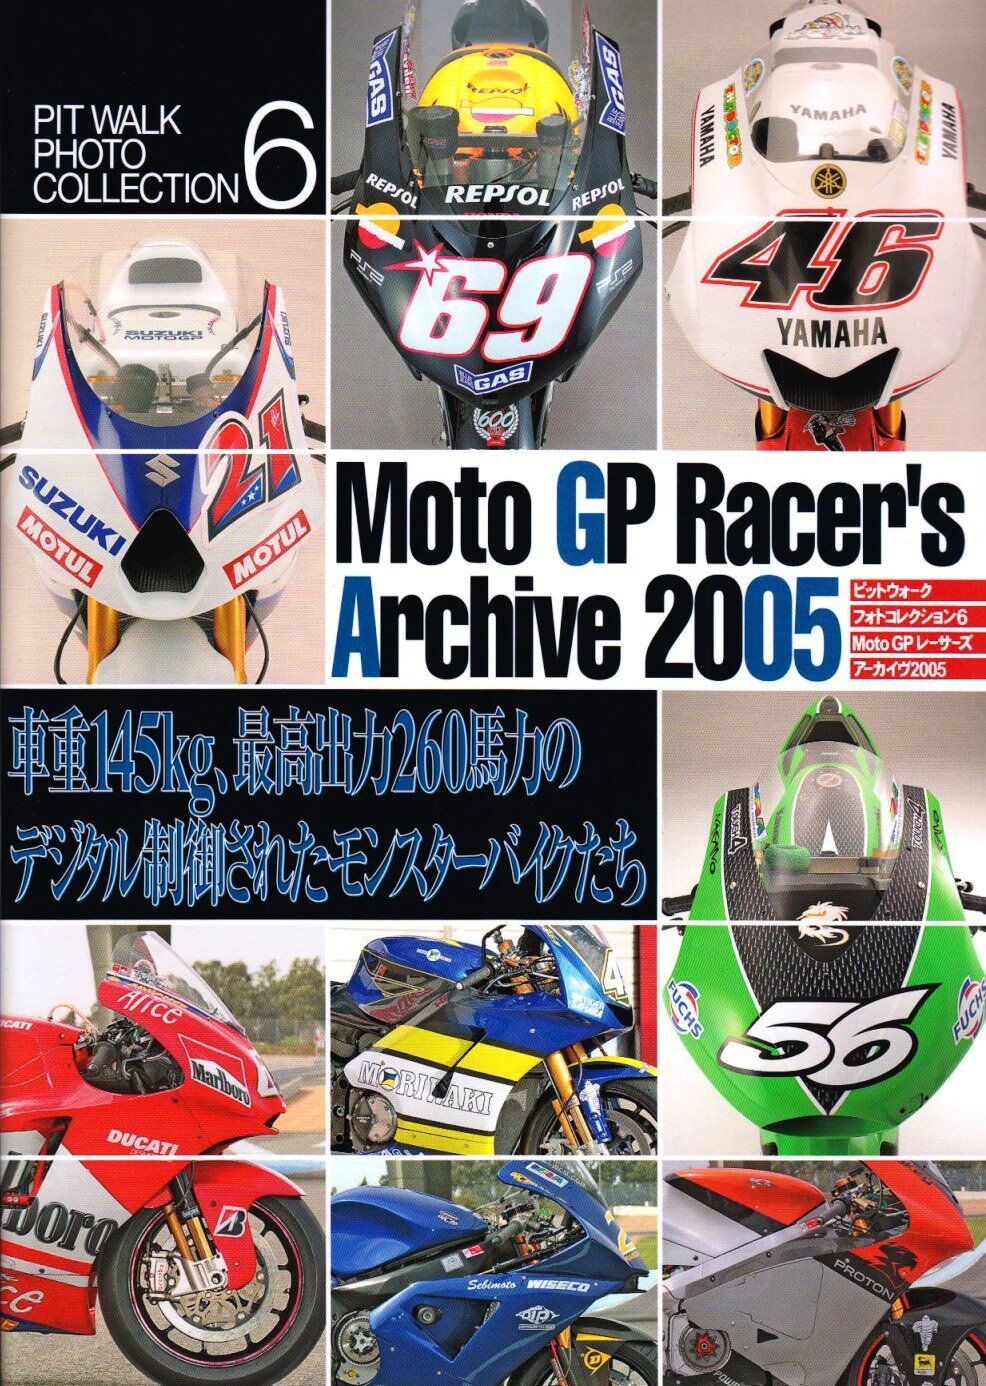 Moto GP Racer's Archive 2005 Photo Pit Walk Collection 6 Book